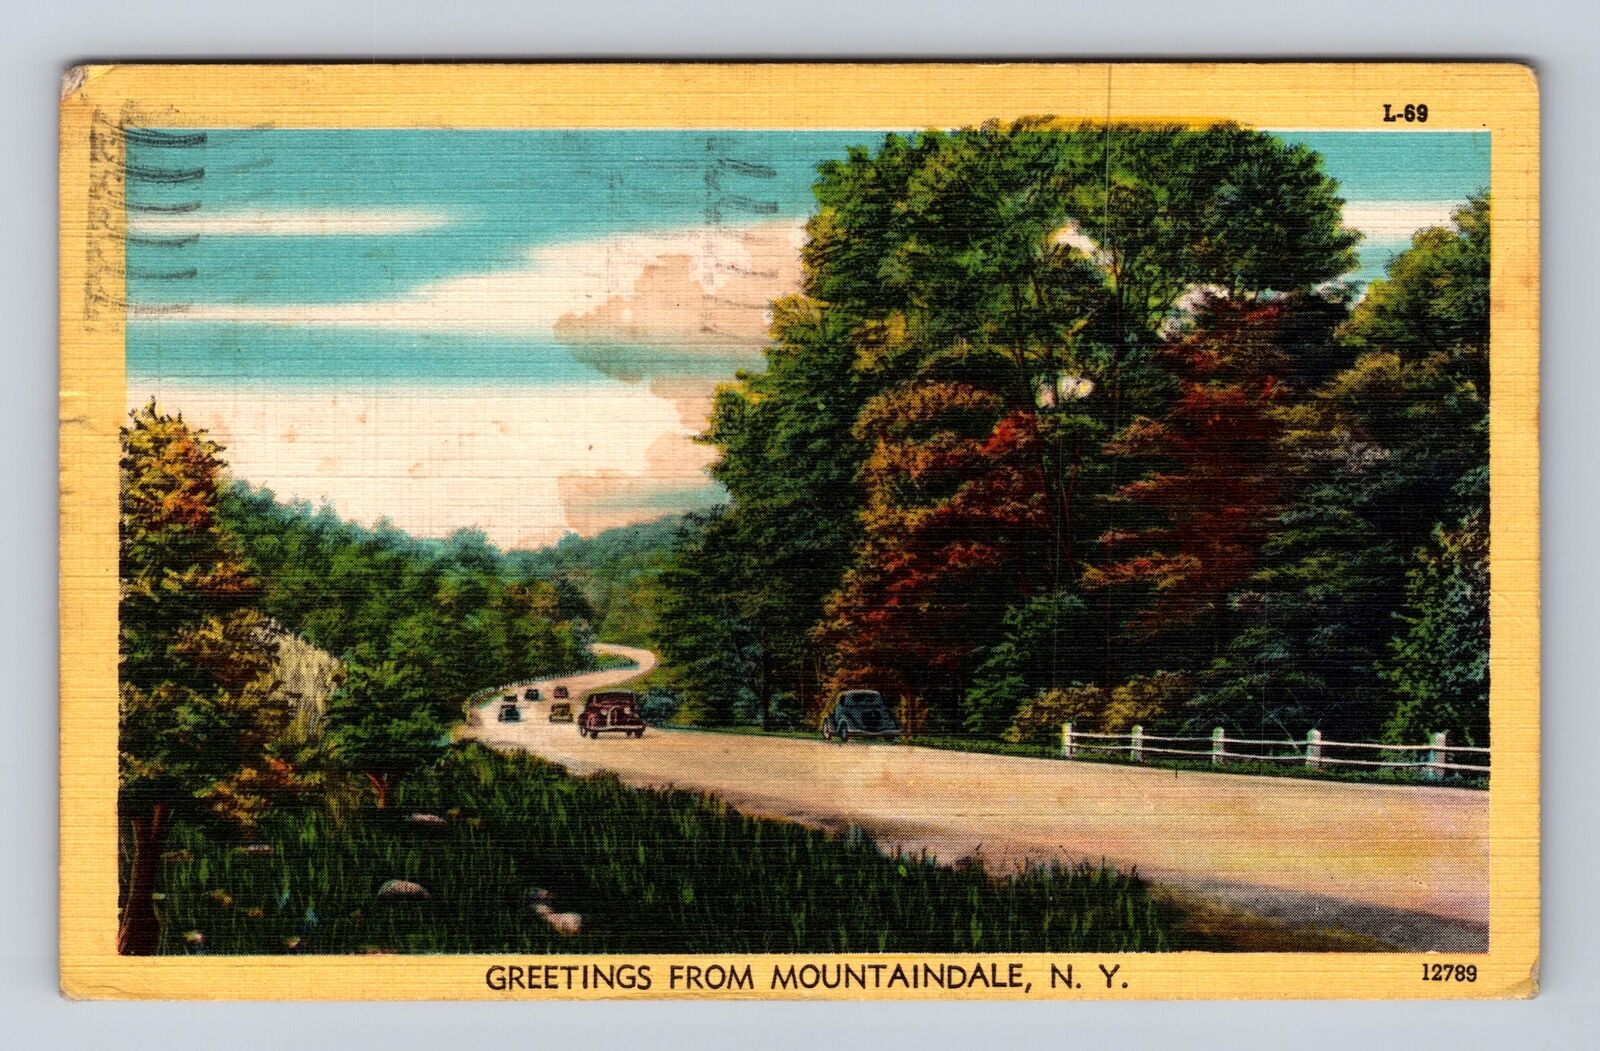 Mountaindale NY-New York, General Greetings, Scenic View, Vintage c1950 Postcard